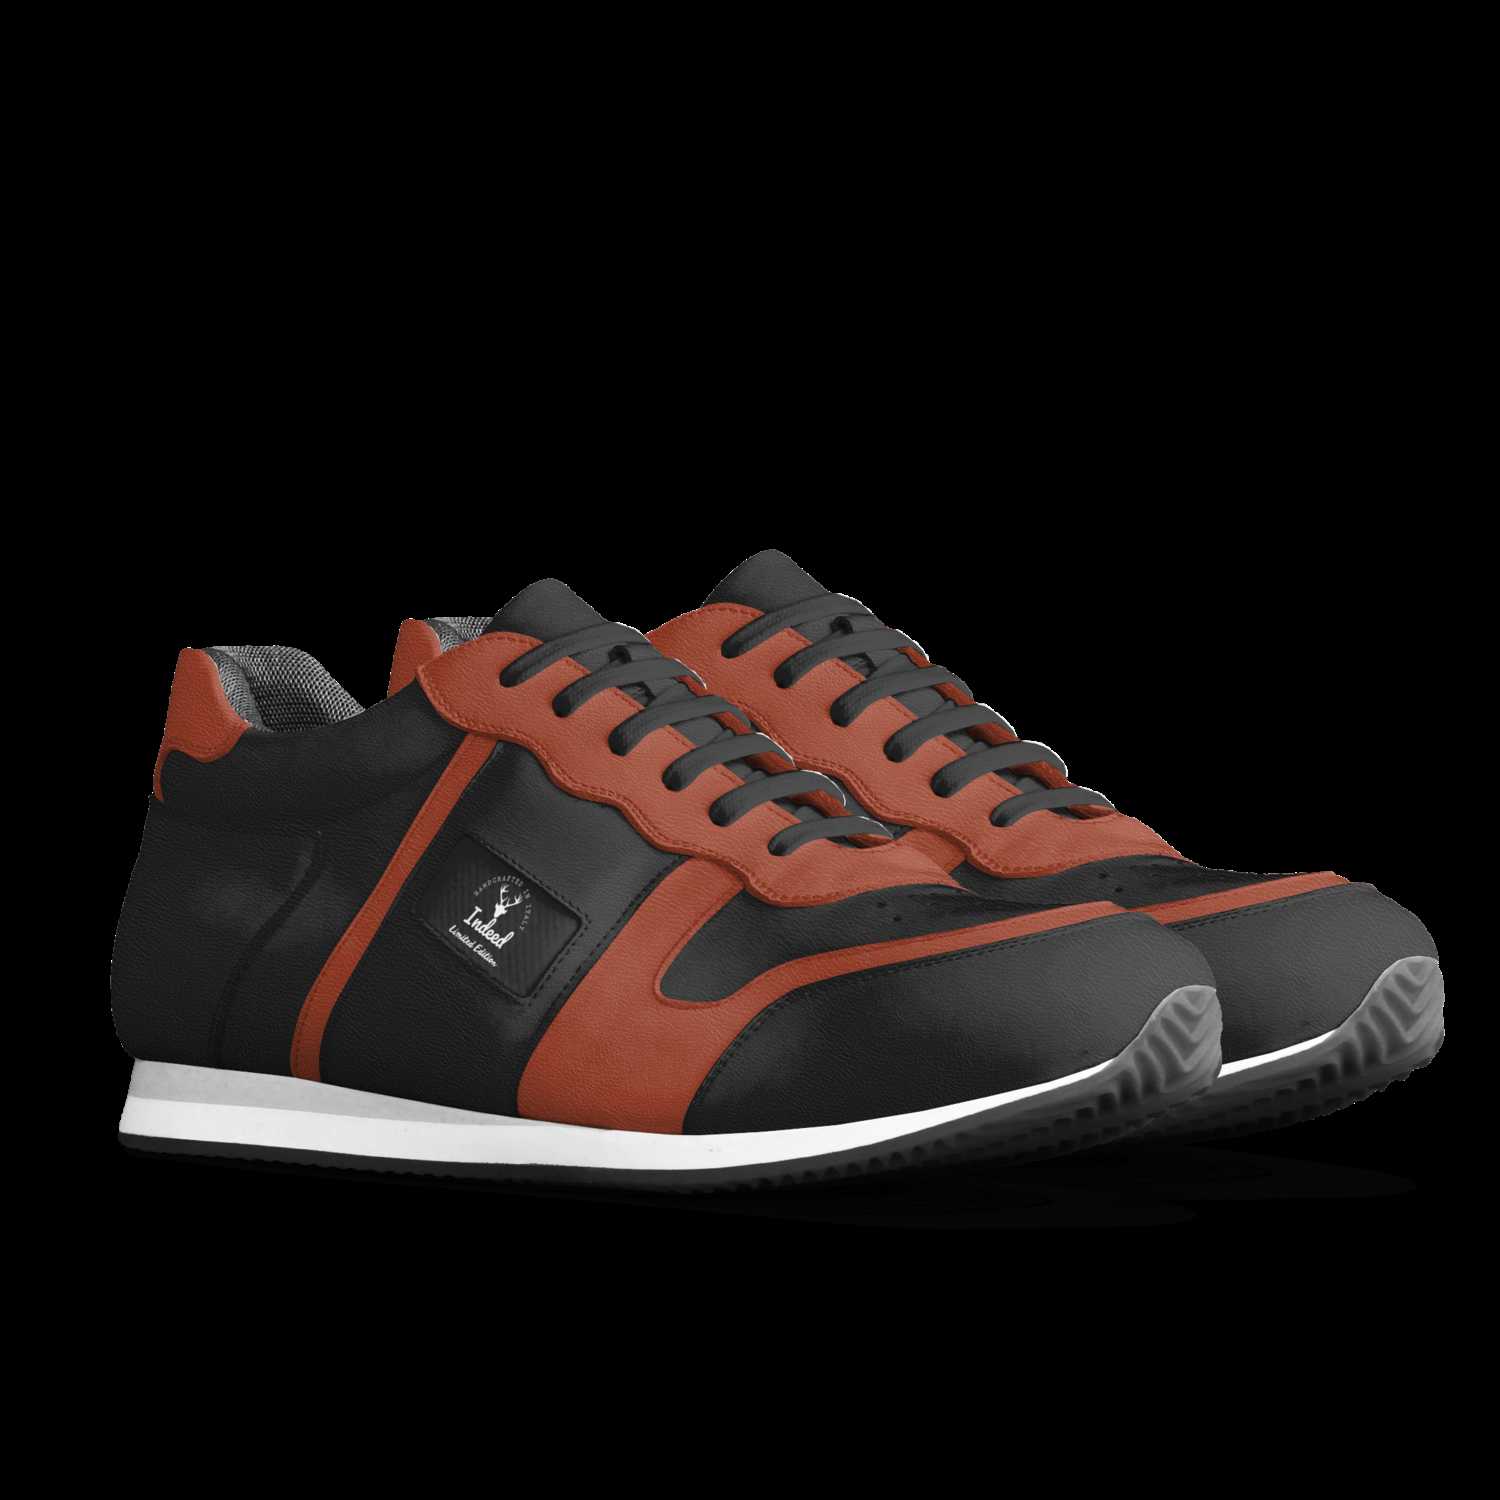 Italy 2017 New MASERATI Fashion Sneakers Sneaker Men Genuine Leather Shoes  Sports Shoes Comfortable Racing Shoes Big Size From Legou666, $47.67 |  DHgate.Com